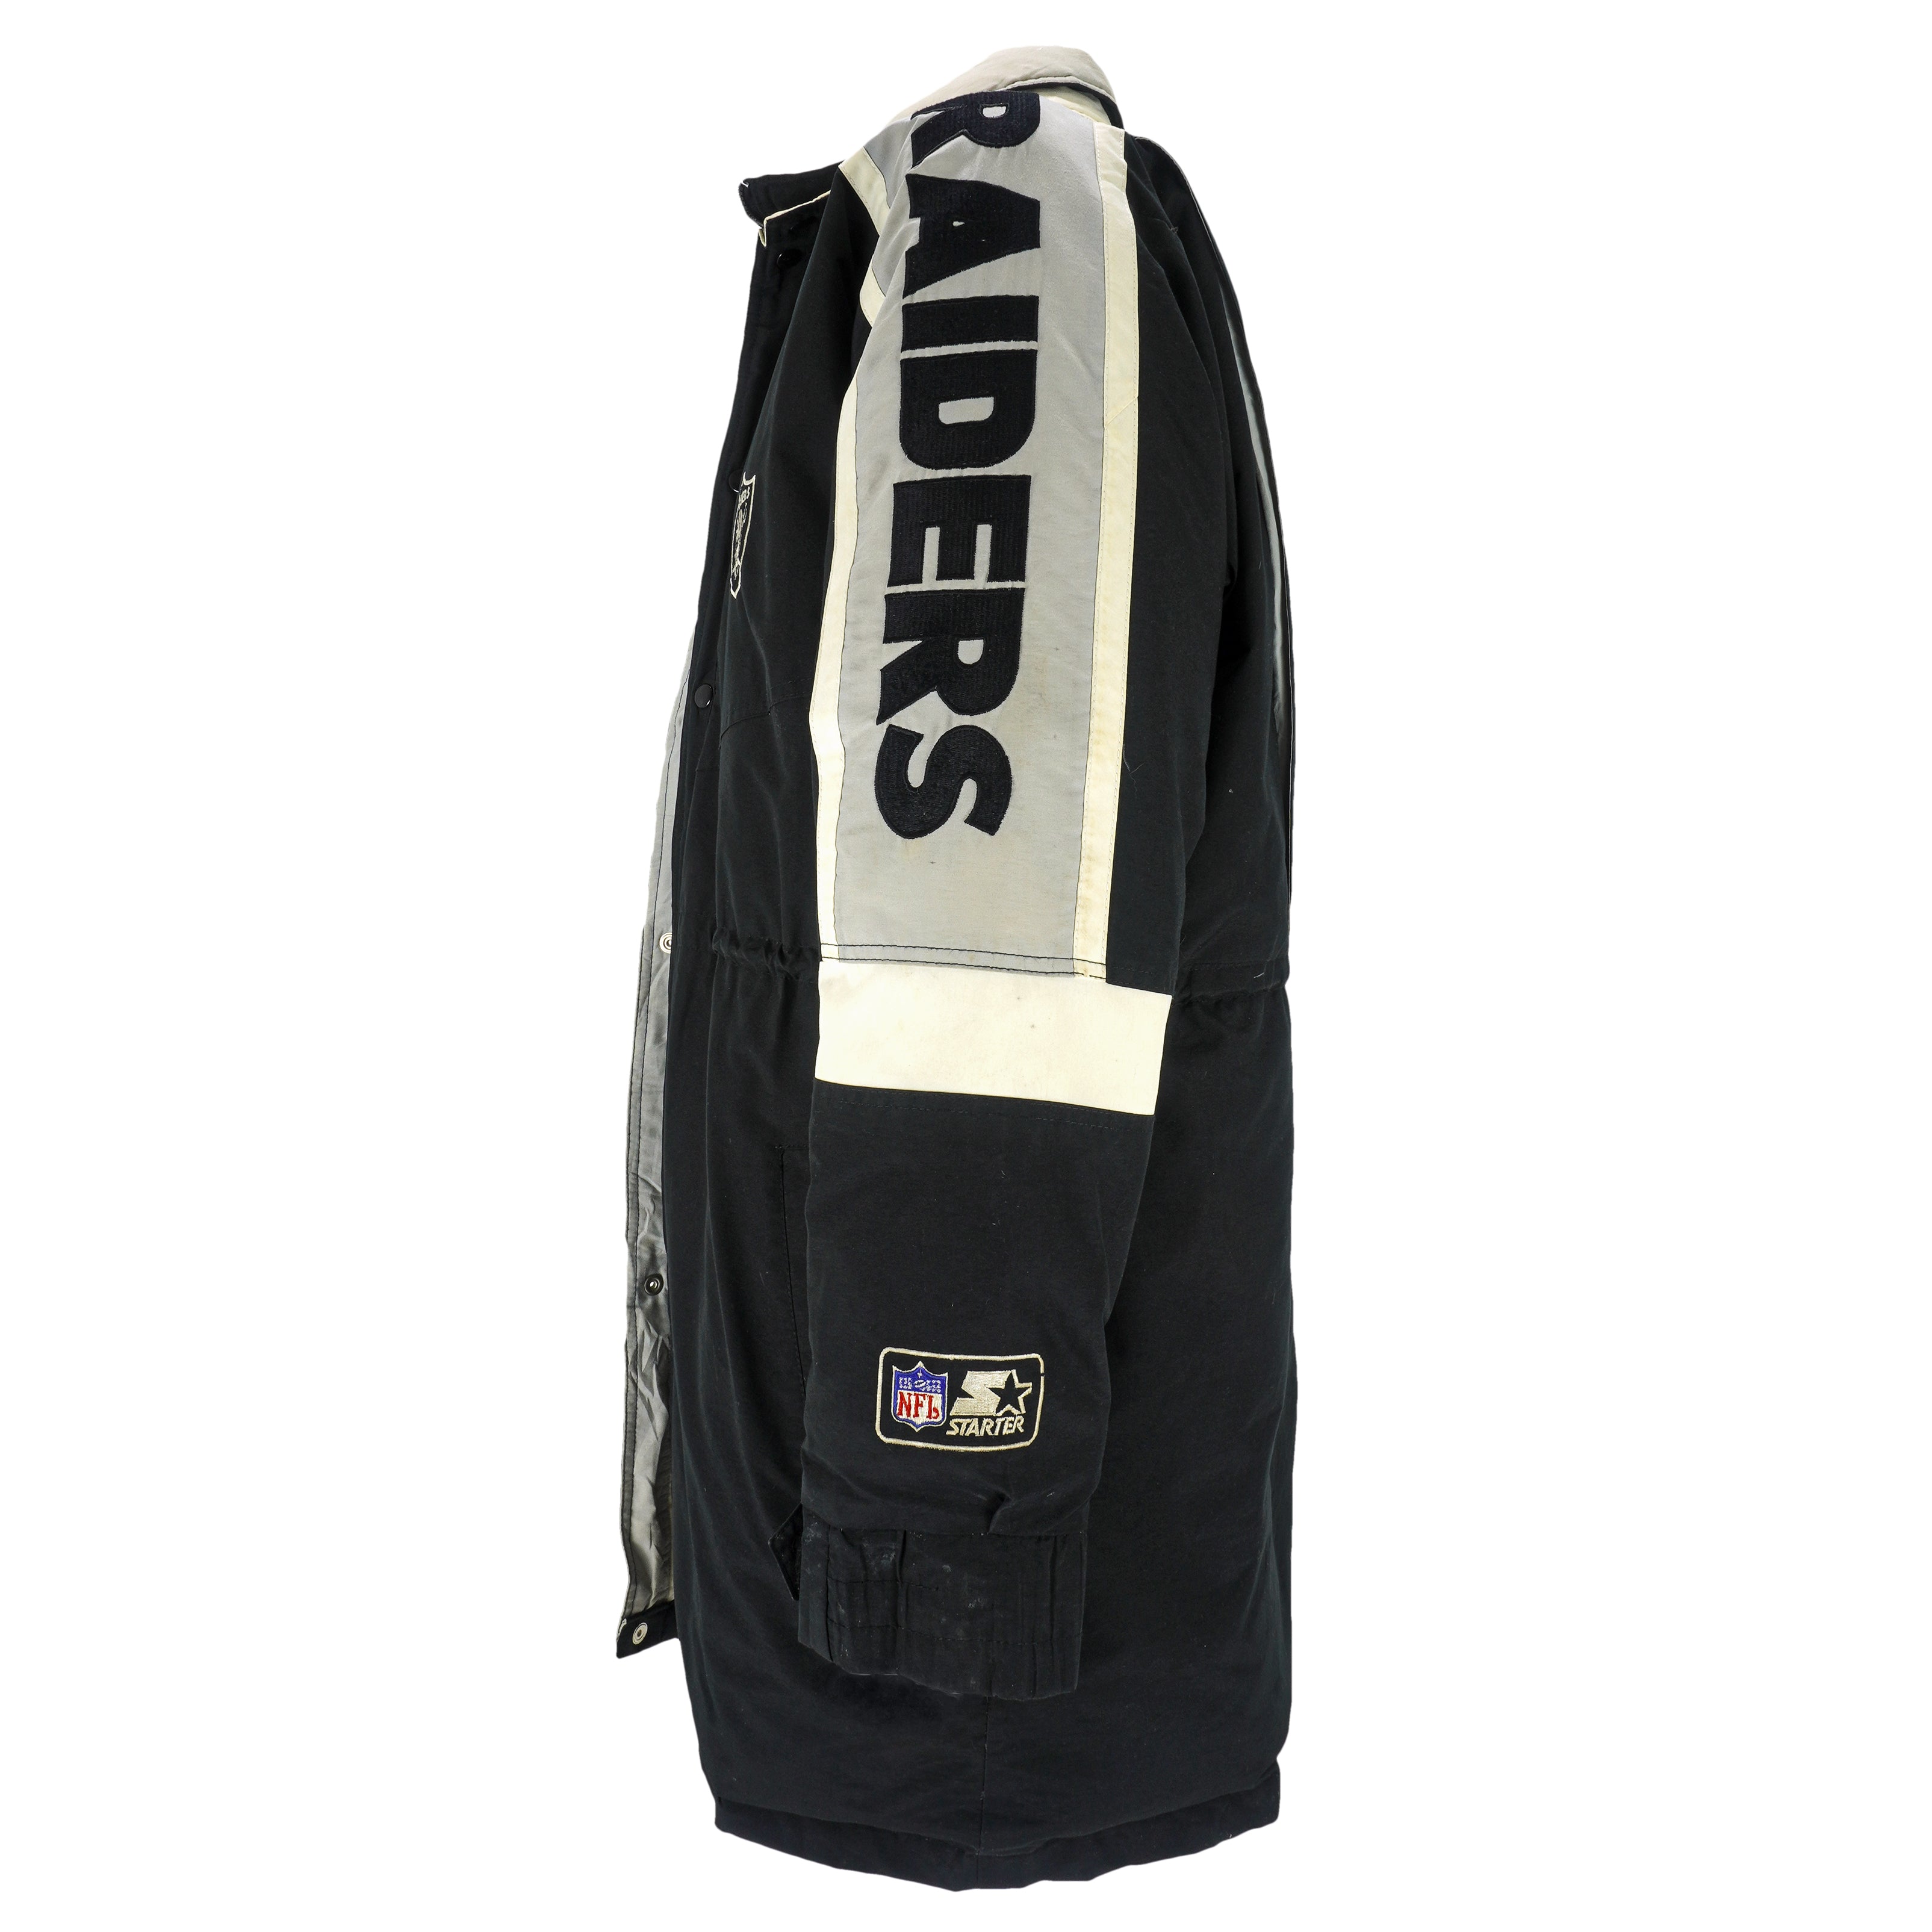 Vintage Starter - Oakland 'Raiders' Spell-Out Long Jacket 1990's